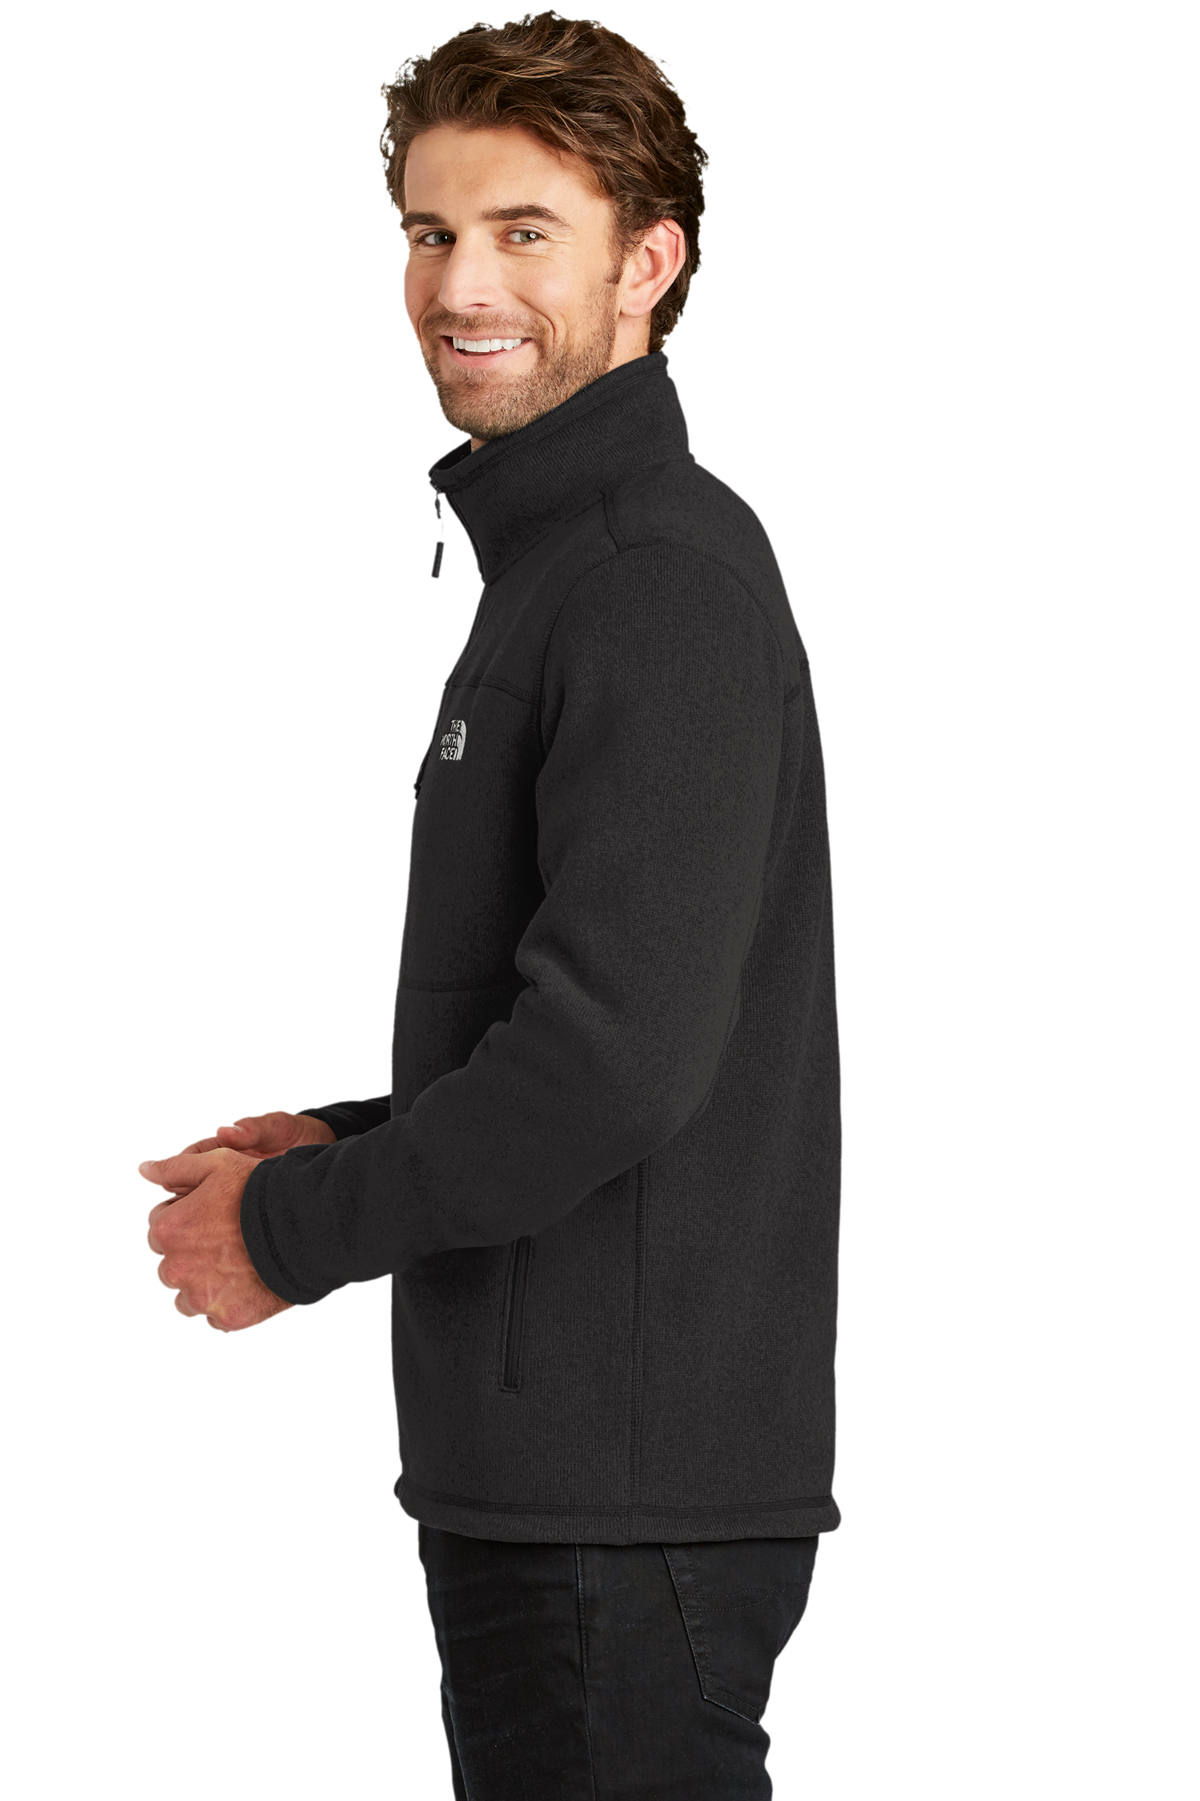 The North Face Sweater Fleece Jacket, Product